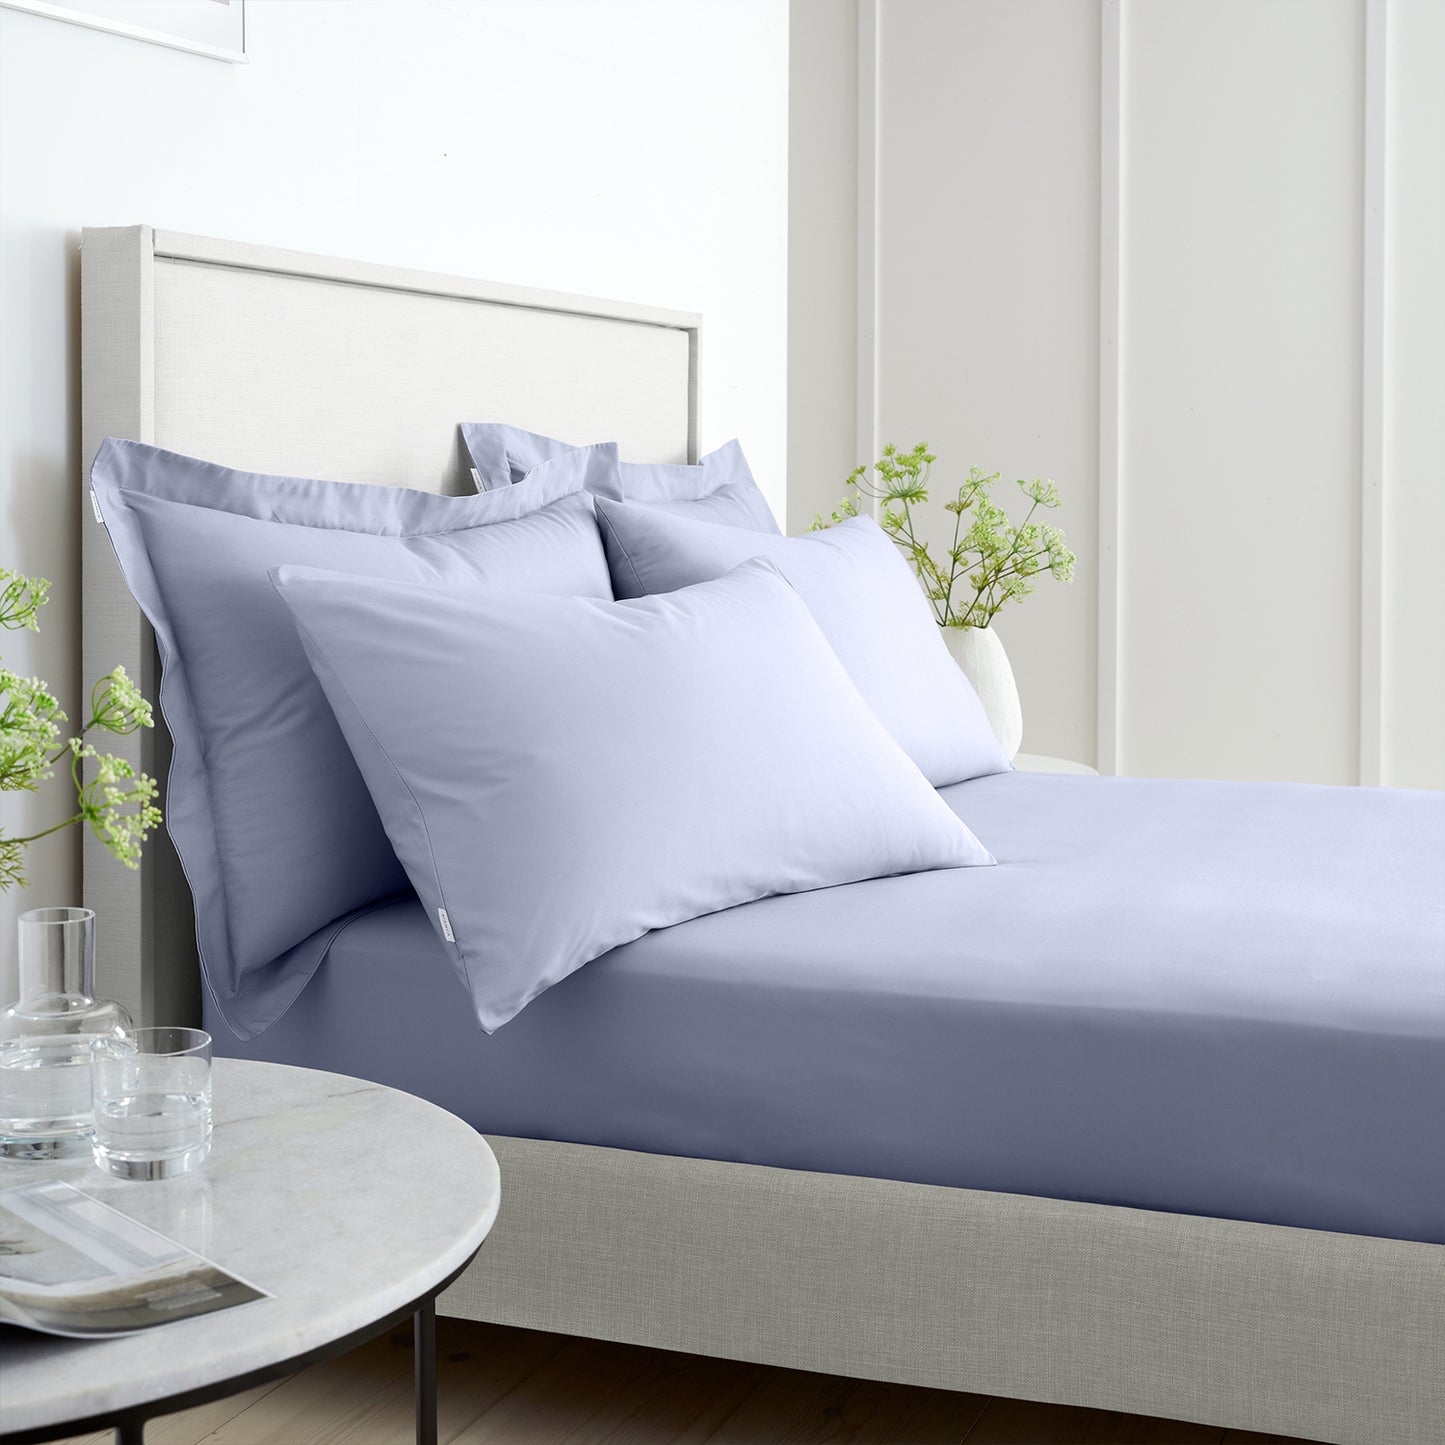 Bianca Lavender 200TC Cotton Percale Fitted Sheet